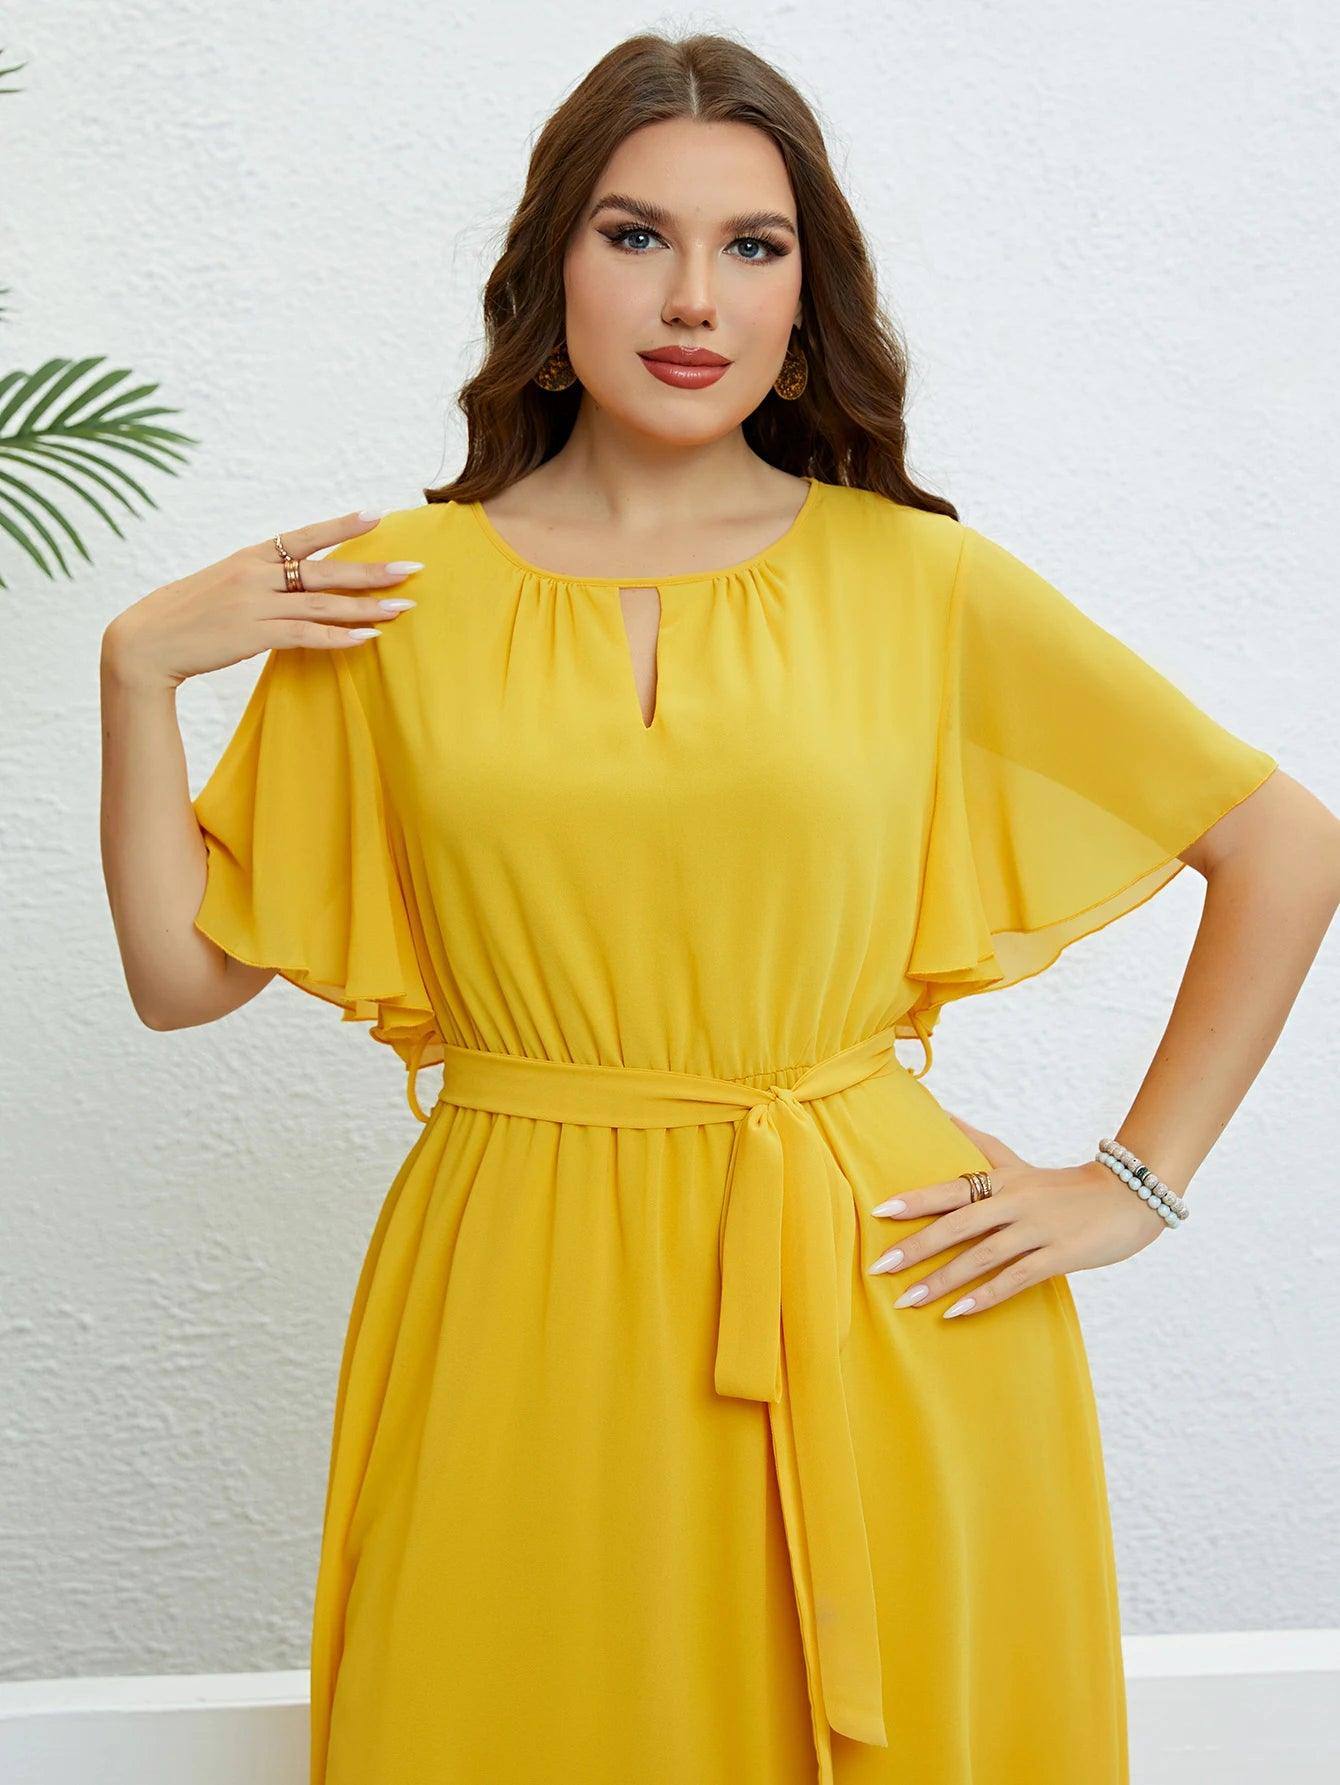 Chiffon Party Dresses For Women Plus Size Summer Solid Color-6